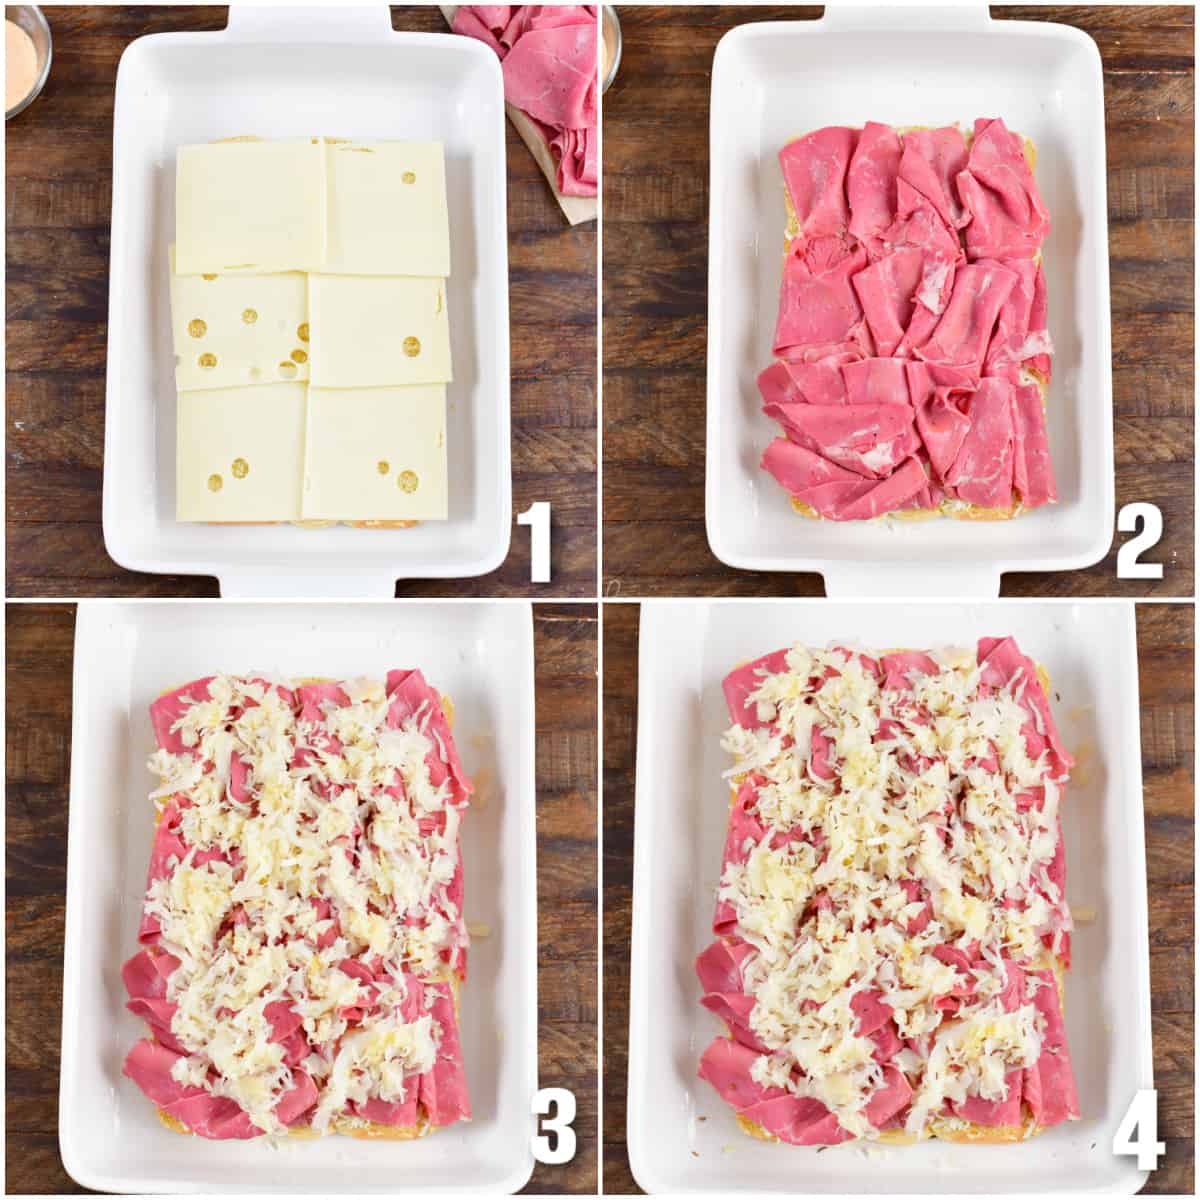 Collage of four images of pitting the reuben sliders together in a baking dish.